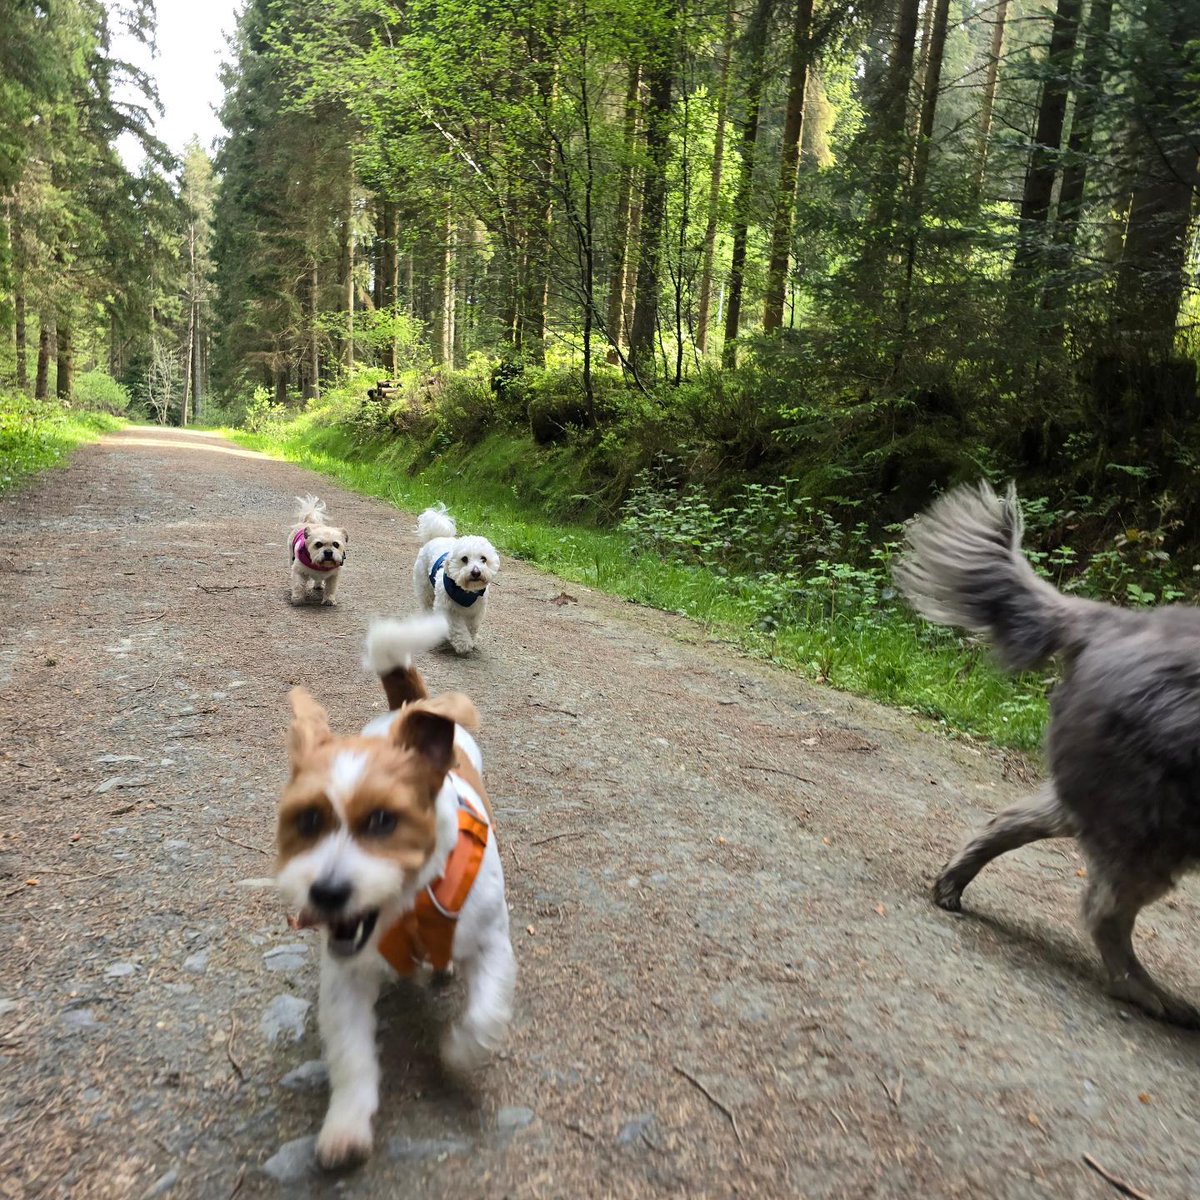 Fun pack walk with our pals yesterday ❤️🐶🐾🌲🏴󠁧󠁢󠁷󠁬󠁳󠁿🪵 #dogsofX